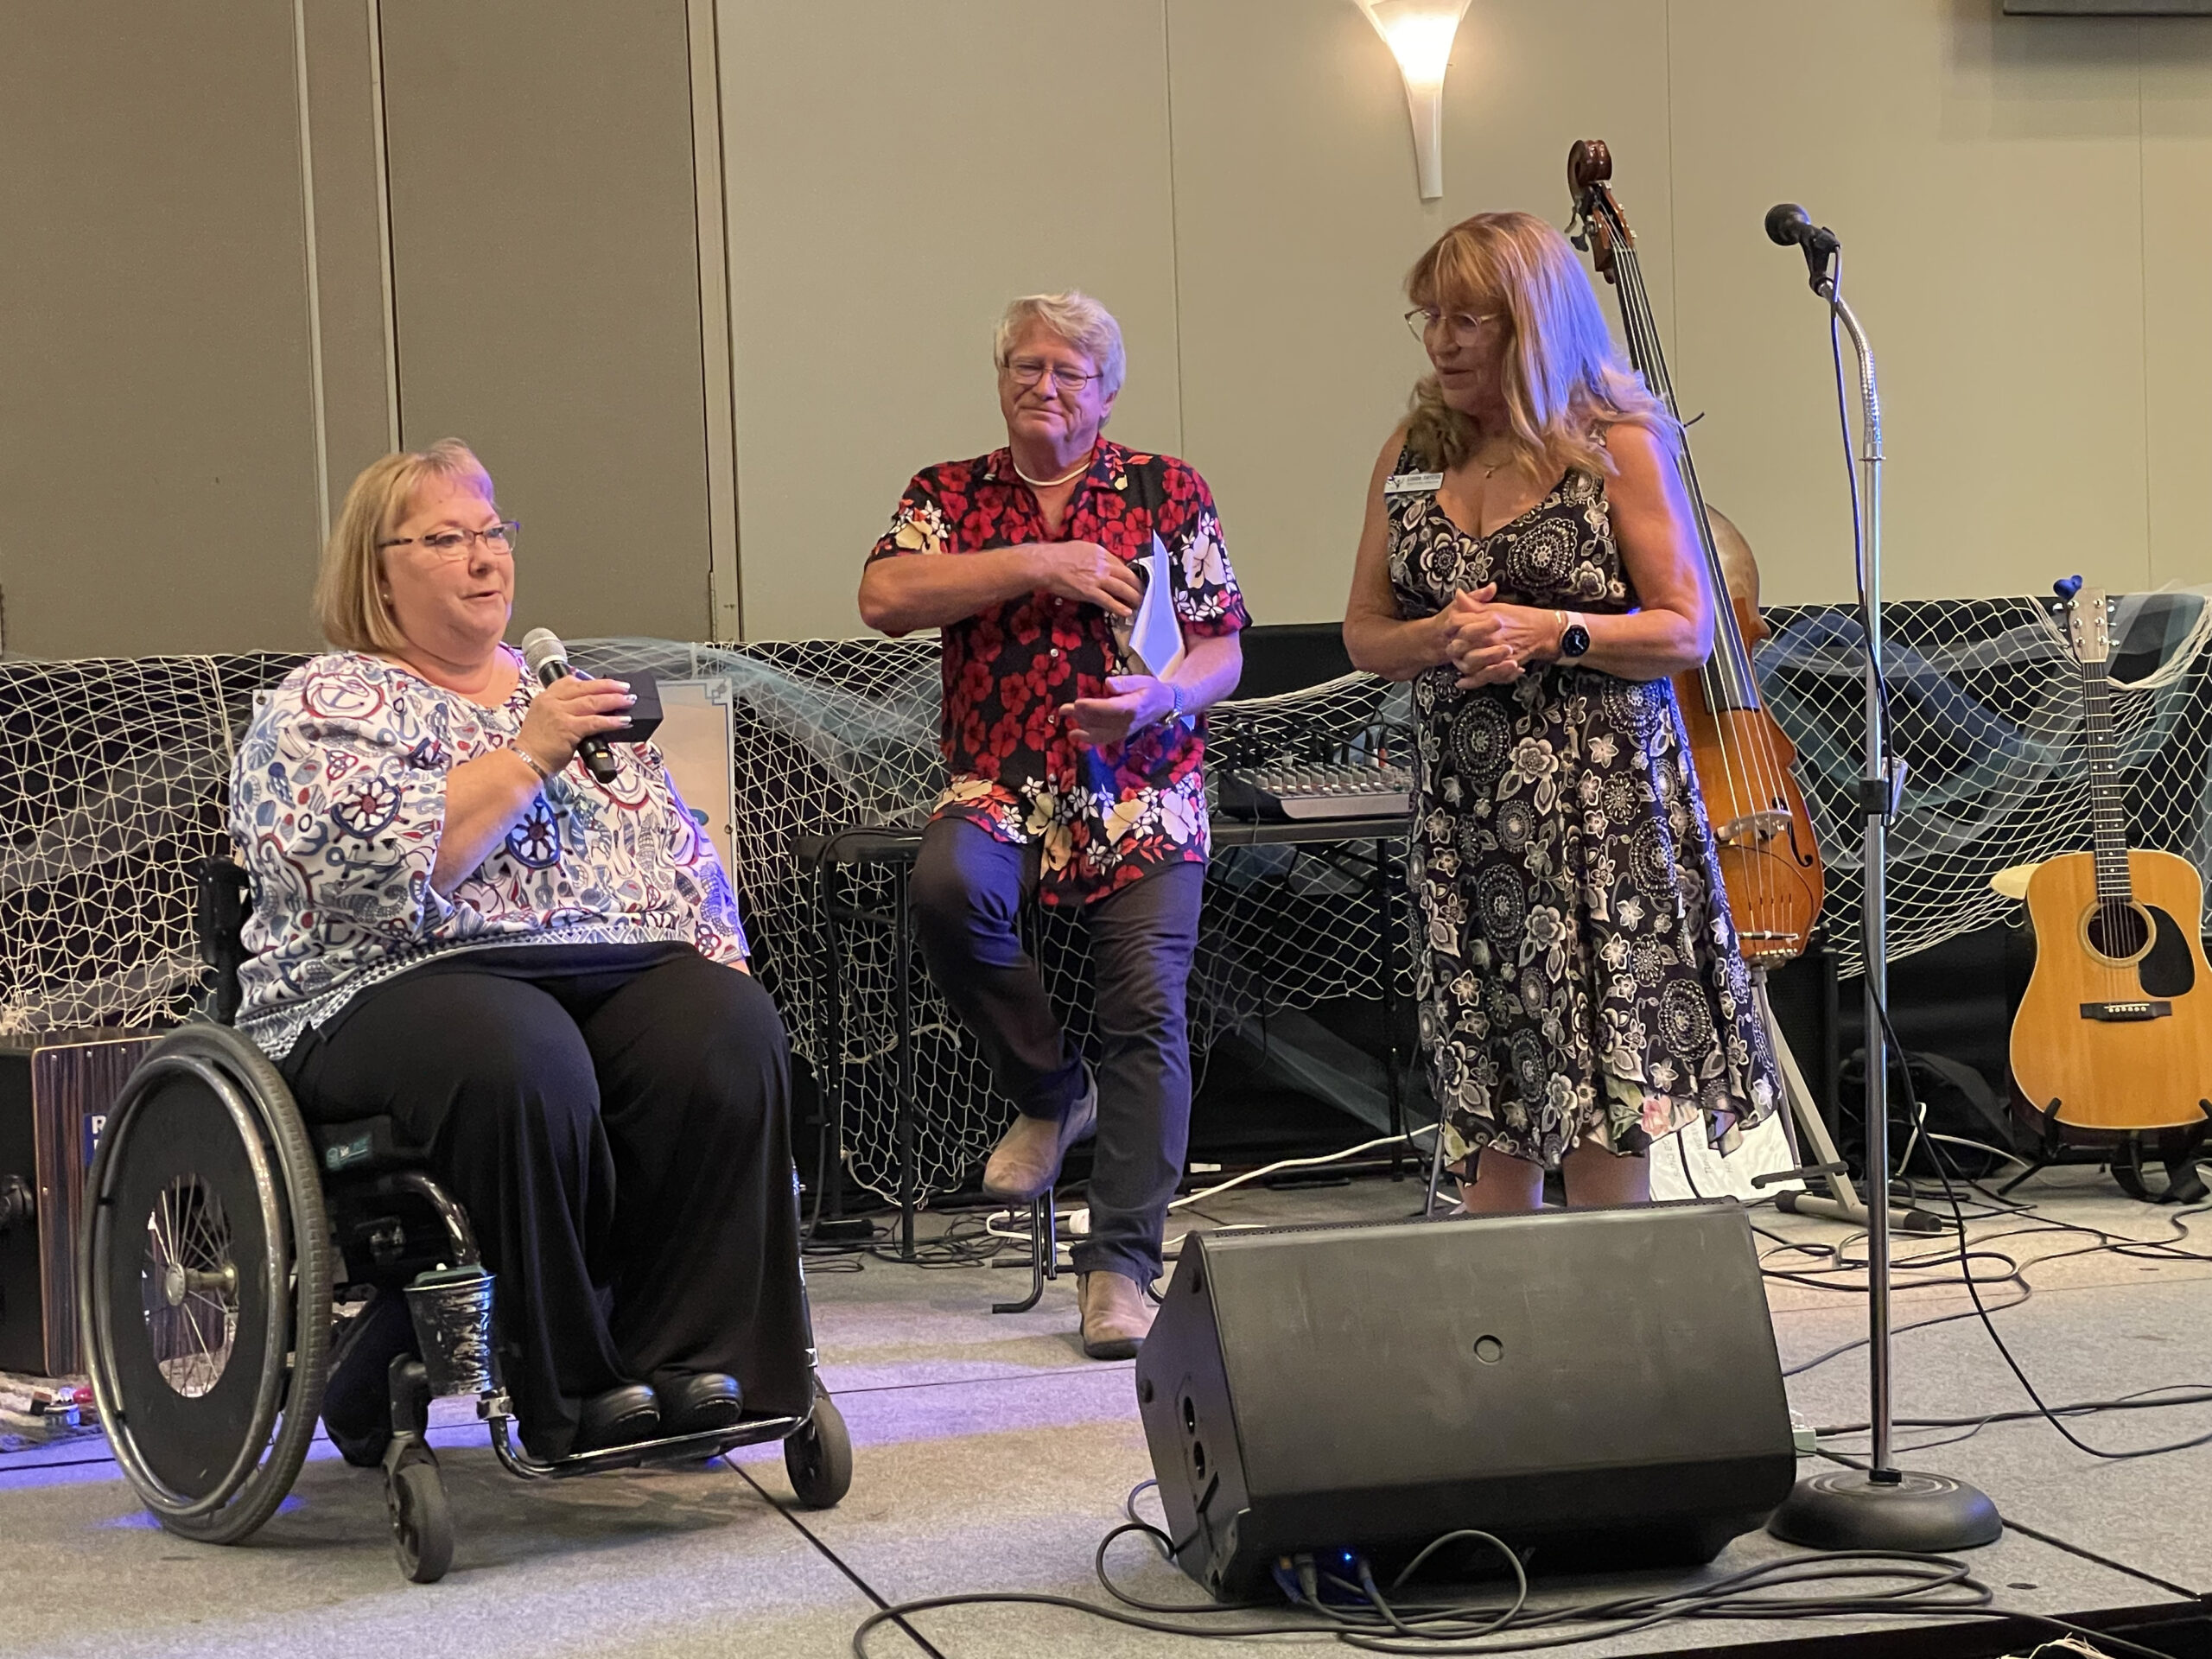 Board members Jennifer Shook and Greg Mueller present outgoing CEO Linda Taylor with a gift while standing on a stage with musical instruments behind them at the CMU ballroom.